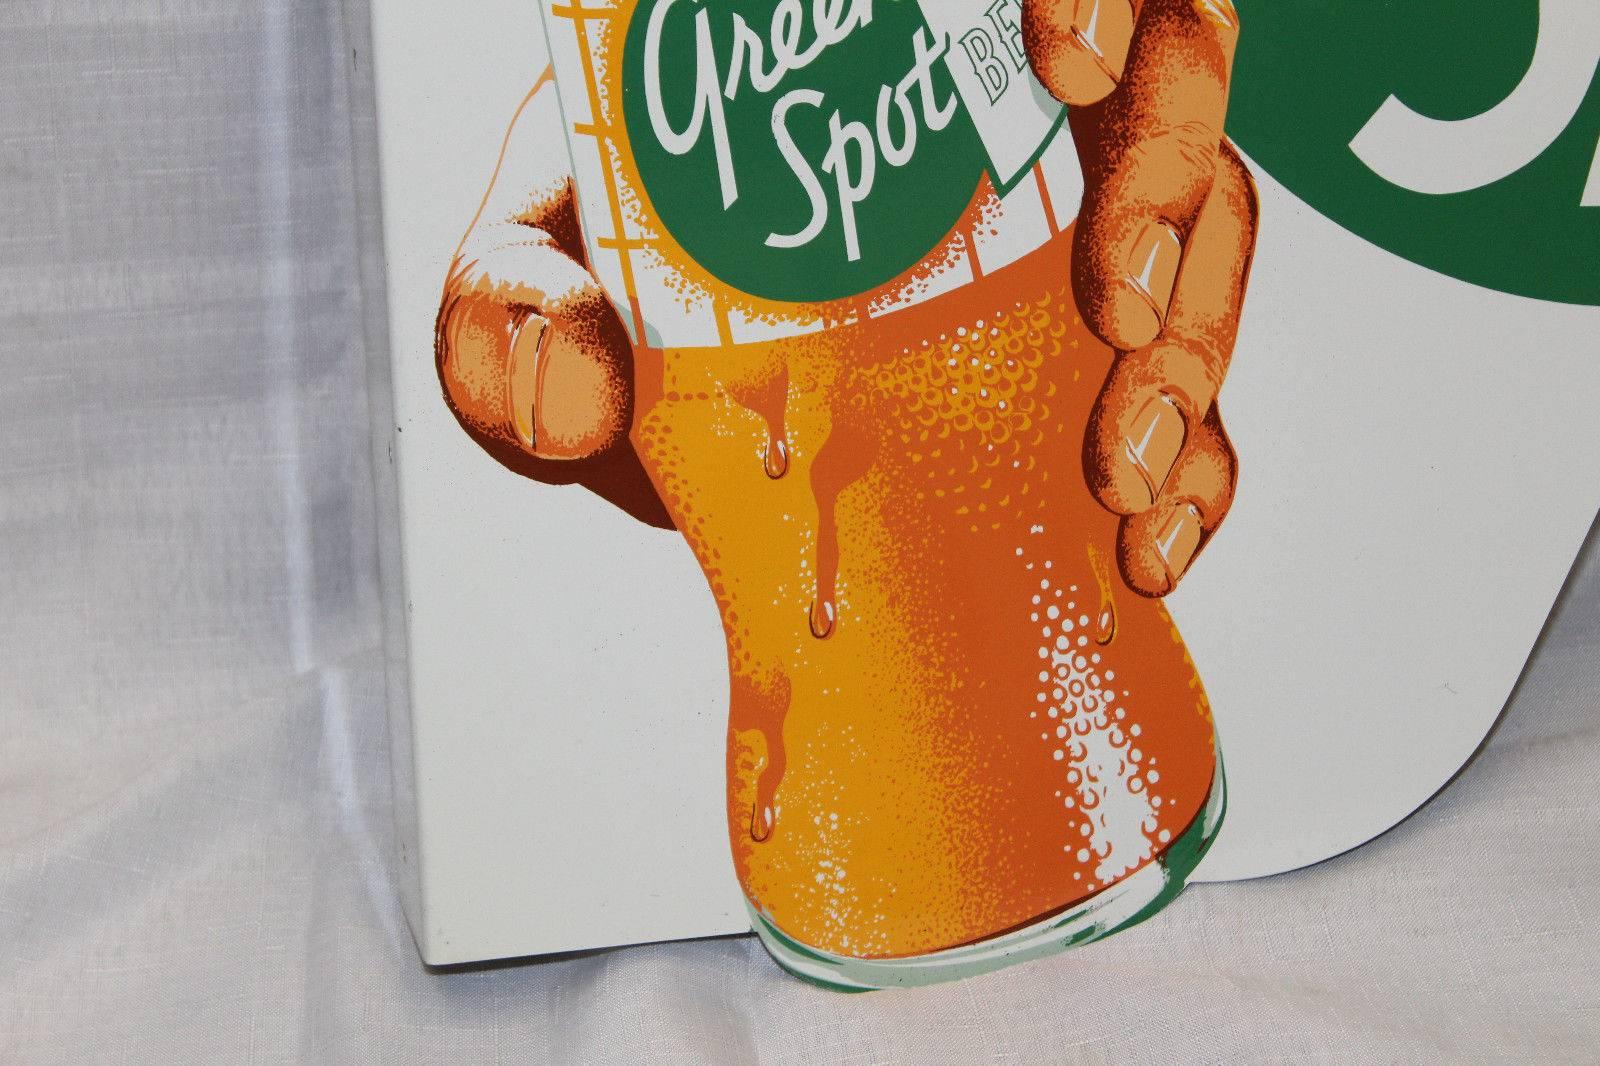 Metal 1950s NOS Green Spot Orange Soda Double-Sided Advertising Tin Flange Sign For Sale